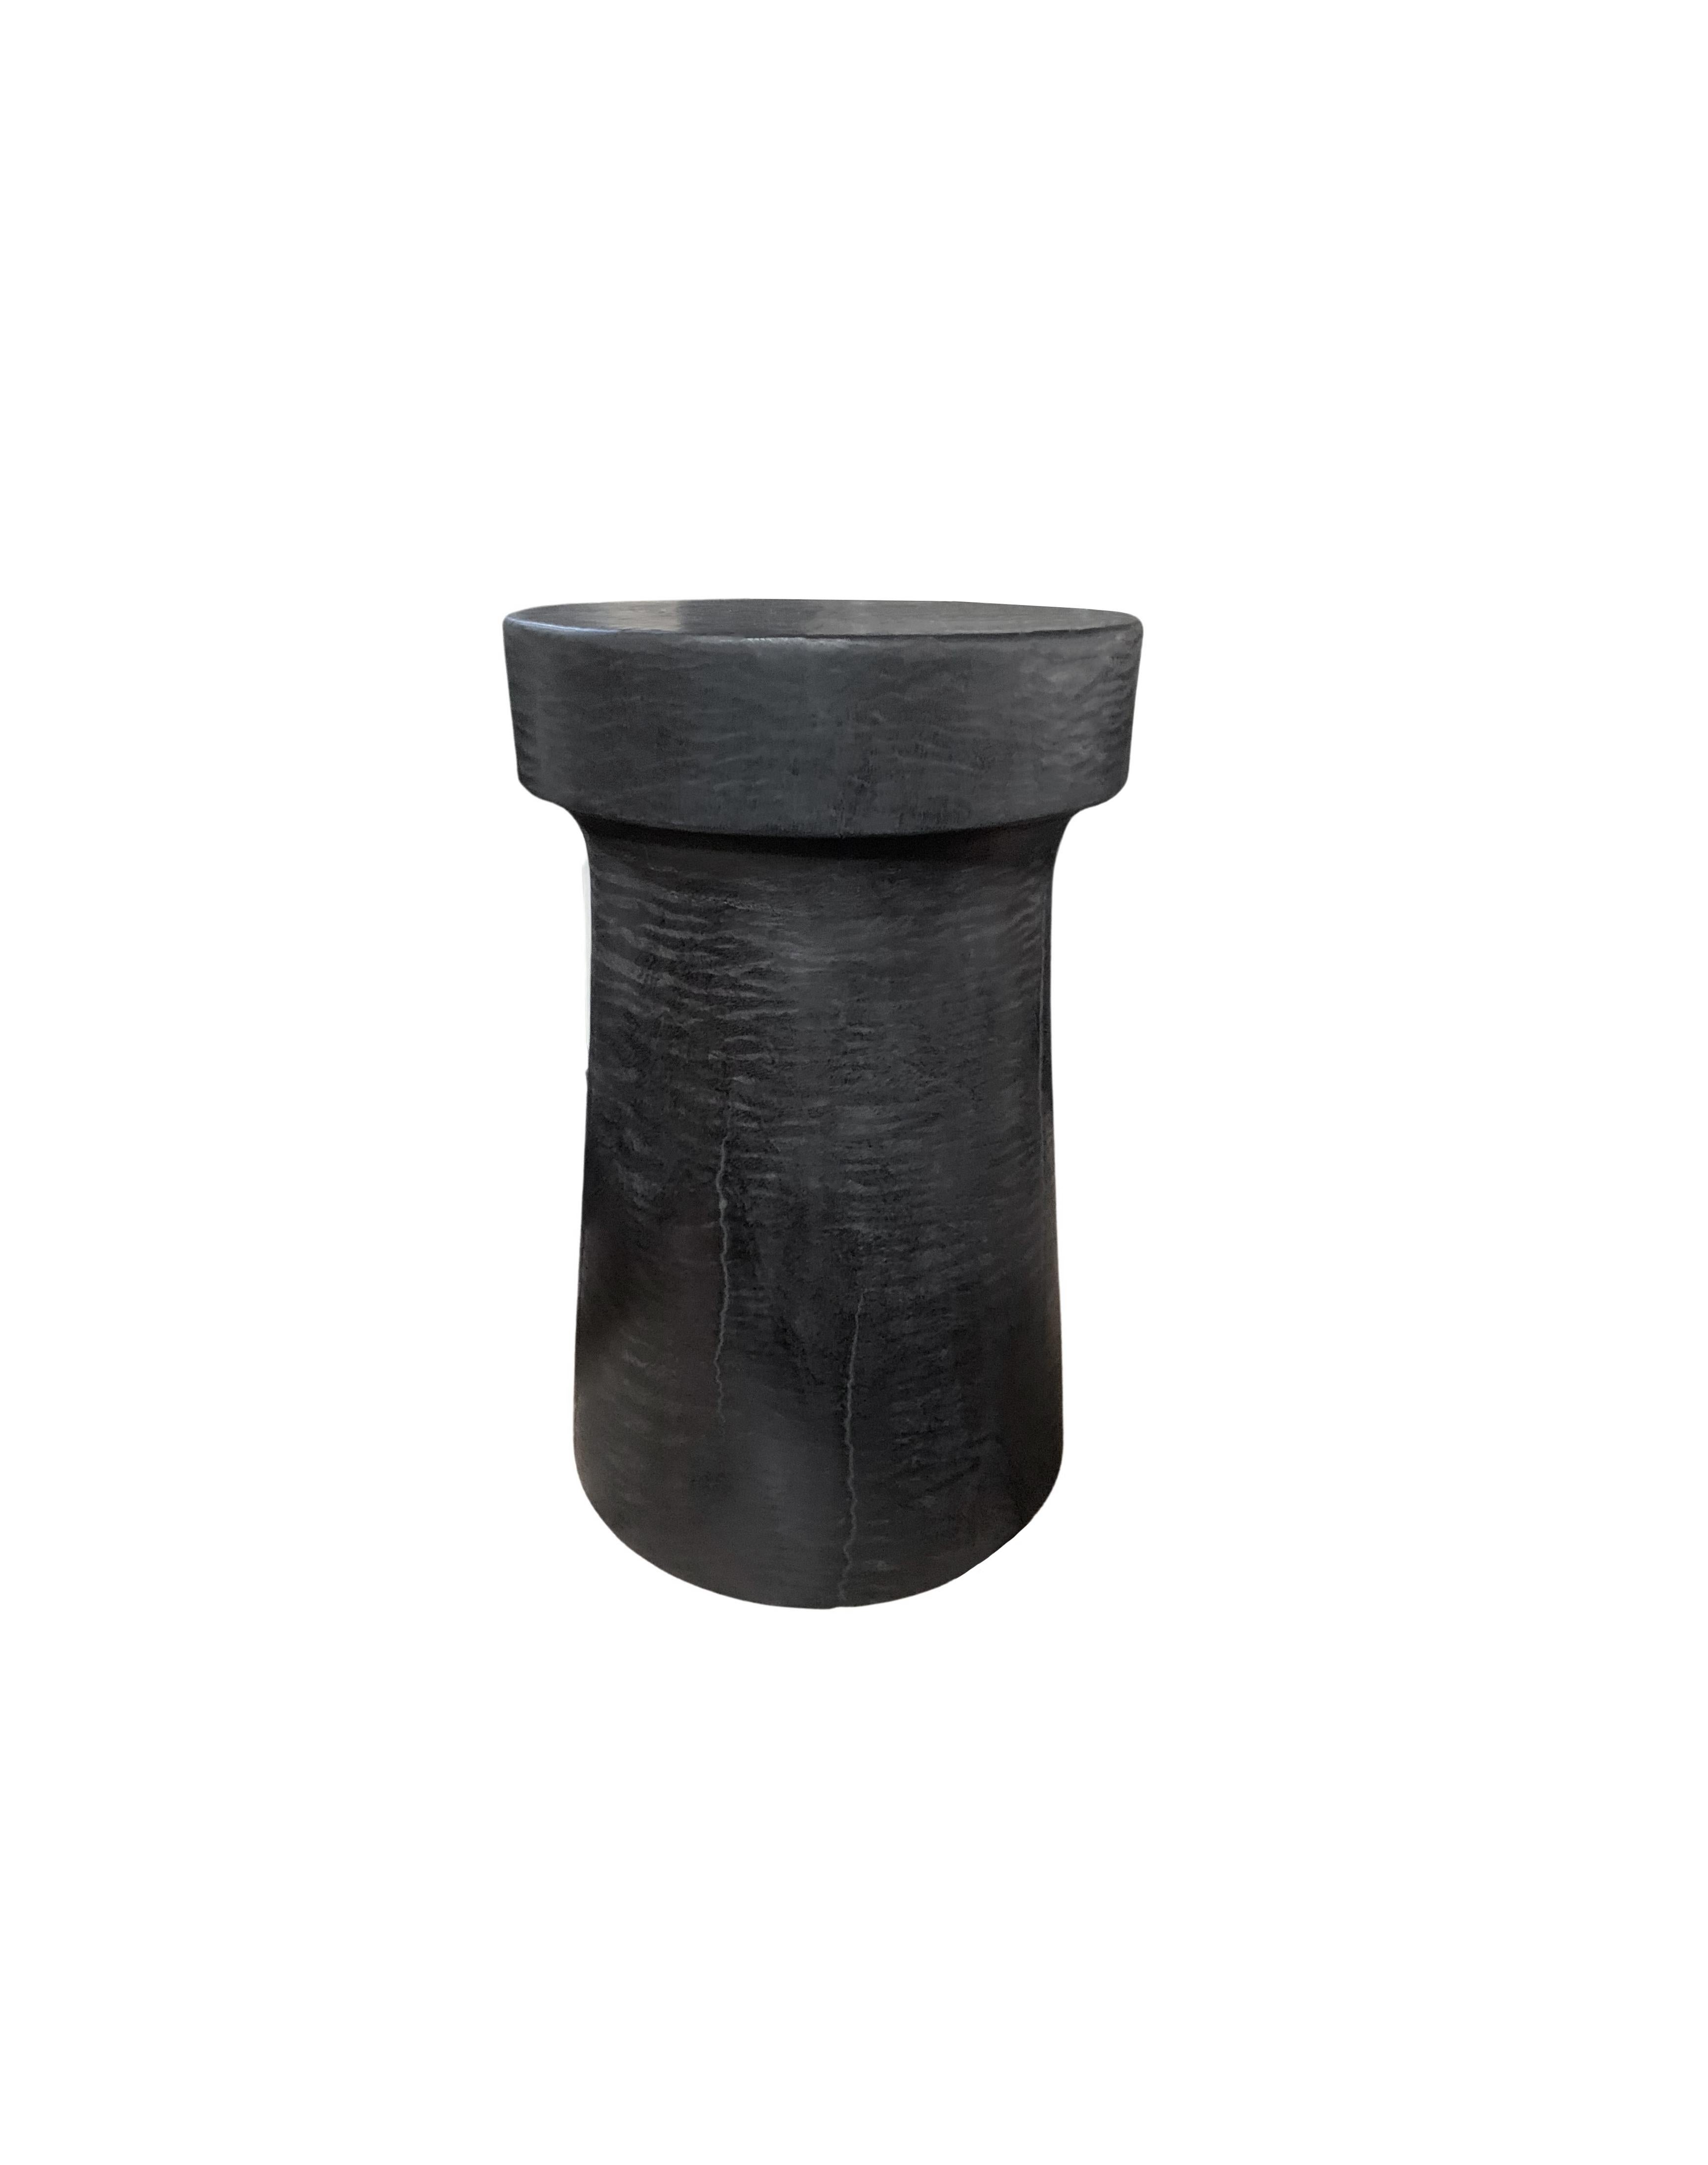 A wonderfully sculptural round side table. Its black pigment was achieved through a burning process creating both a wonderful colour and effect. Its neutral pigment and subtle wood texture makes it perfect for any space. A uniquely sculptural and